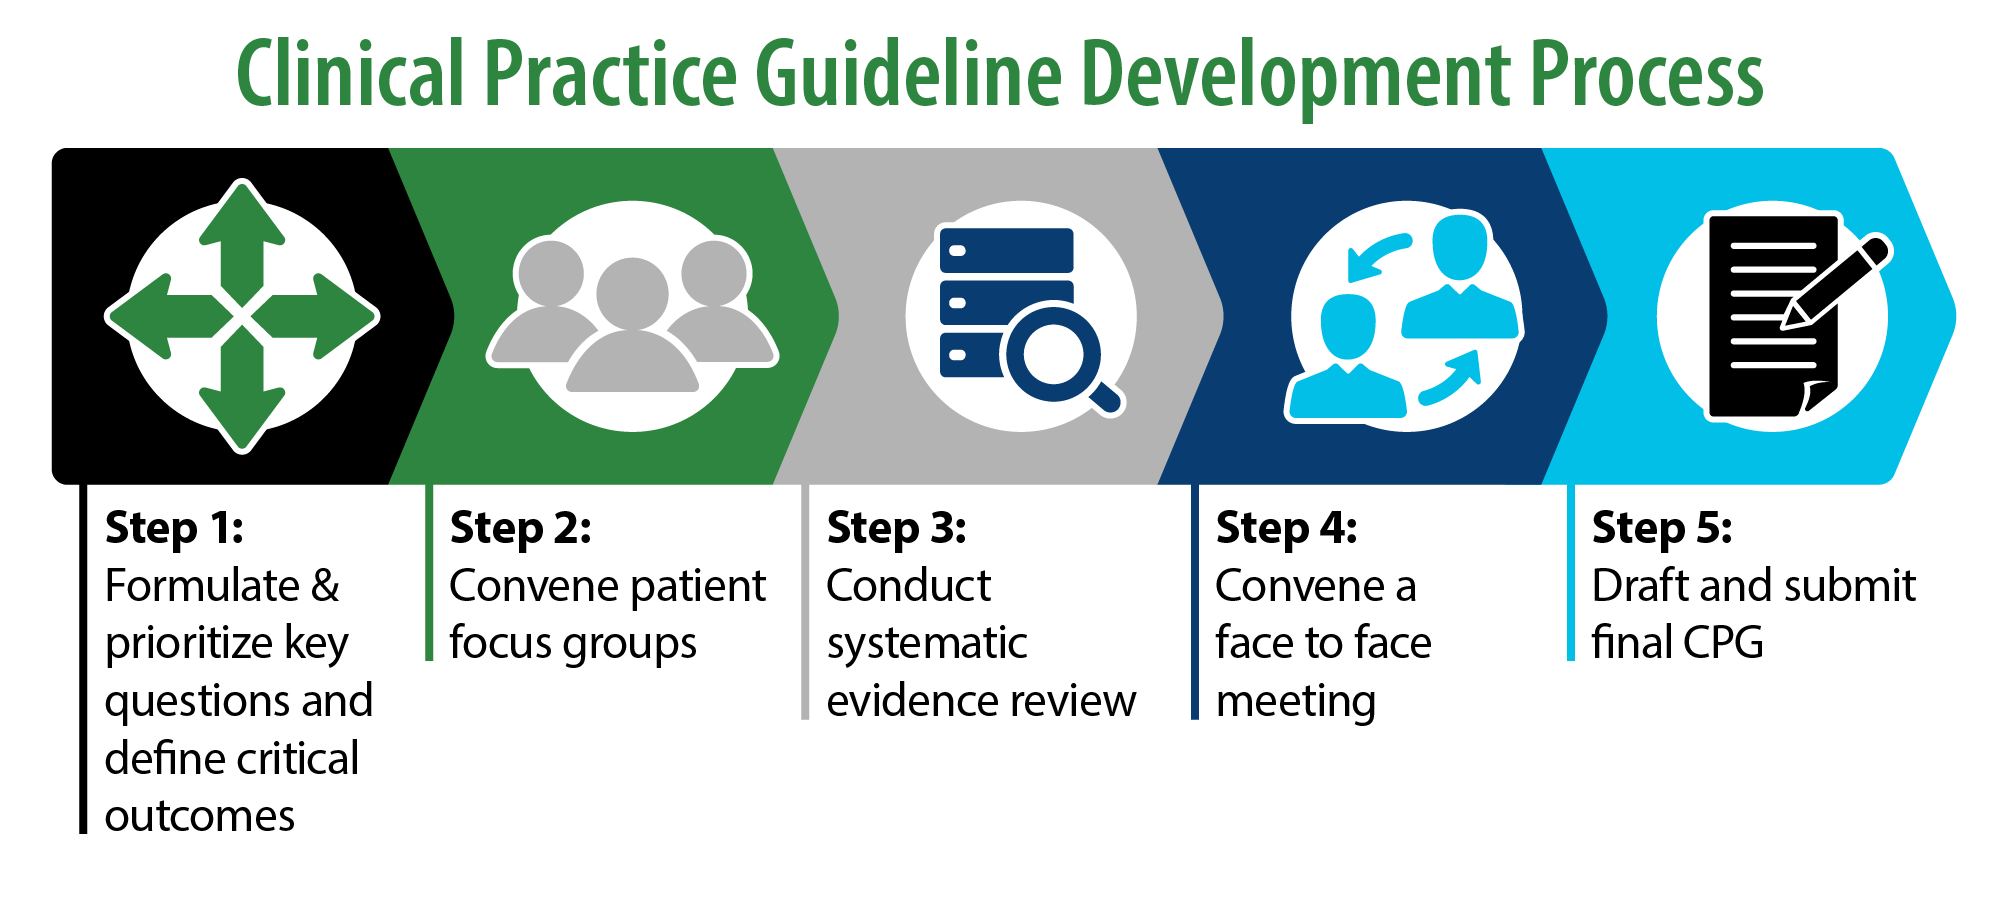 CPG Development Process: Step 1 - Formulate and prioritize key questions and define critical outcomes. Step 2 - Convent patient focus groups. Step 3 - Conduct systematic evidence review. Step 4 - Convene a face to face meeting. Step 5 - Draft and submit final CPG